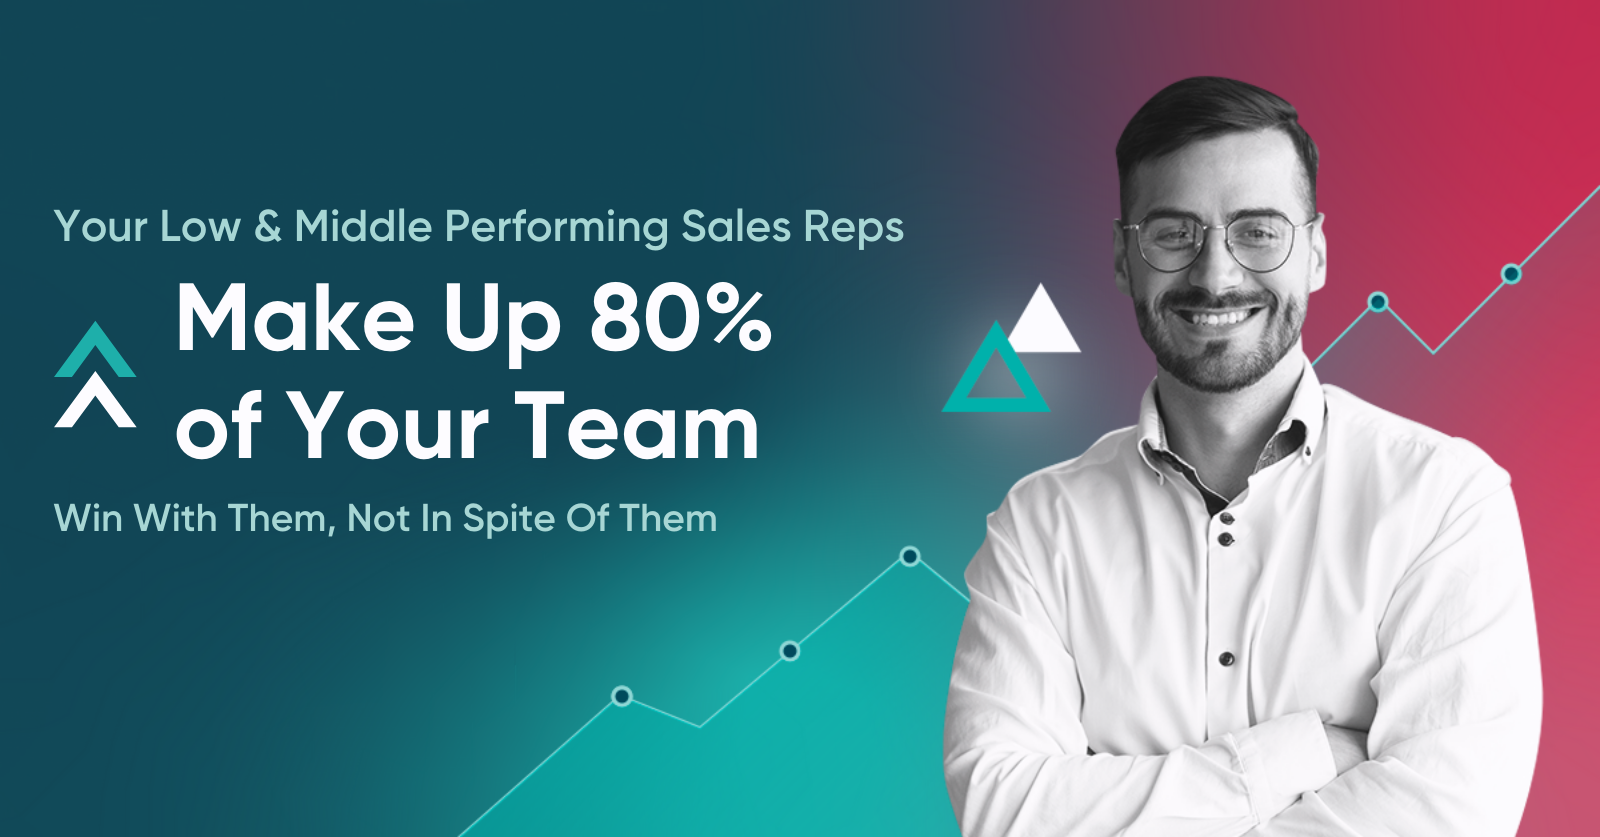 Keeping Your Sales Team Motivated Can Be A Real Struggle